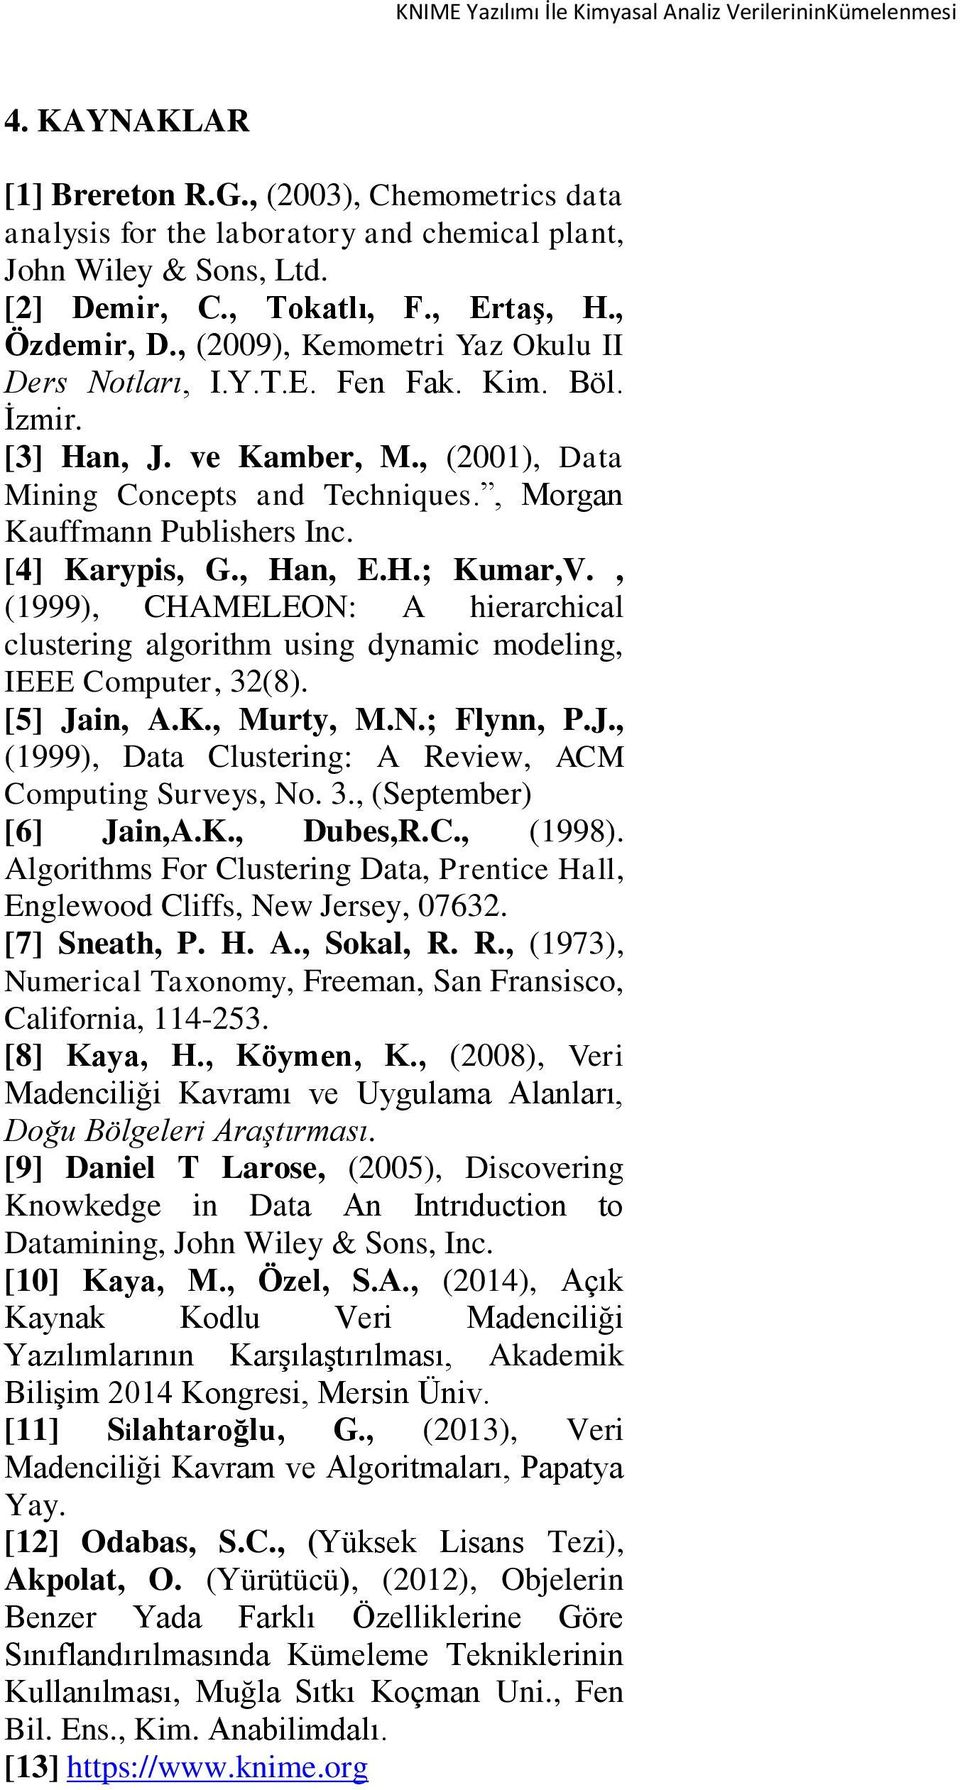 CHAMELEON: A hierarchical clustering algorithm using dynamic modeling, IEEE Computer, 32(8) [5] Jain, AK, Murty, MN; Flynn, PJ, (1999), Data Clustering: A Review, ACM Computing Surveys, No 3,